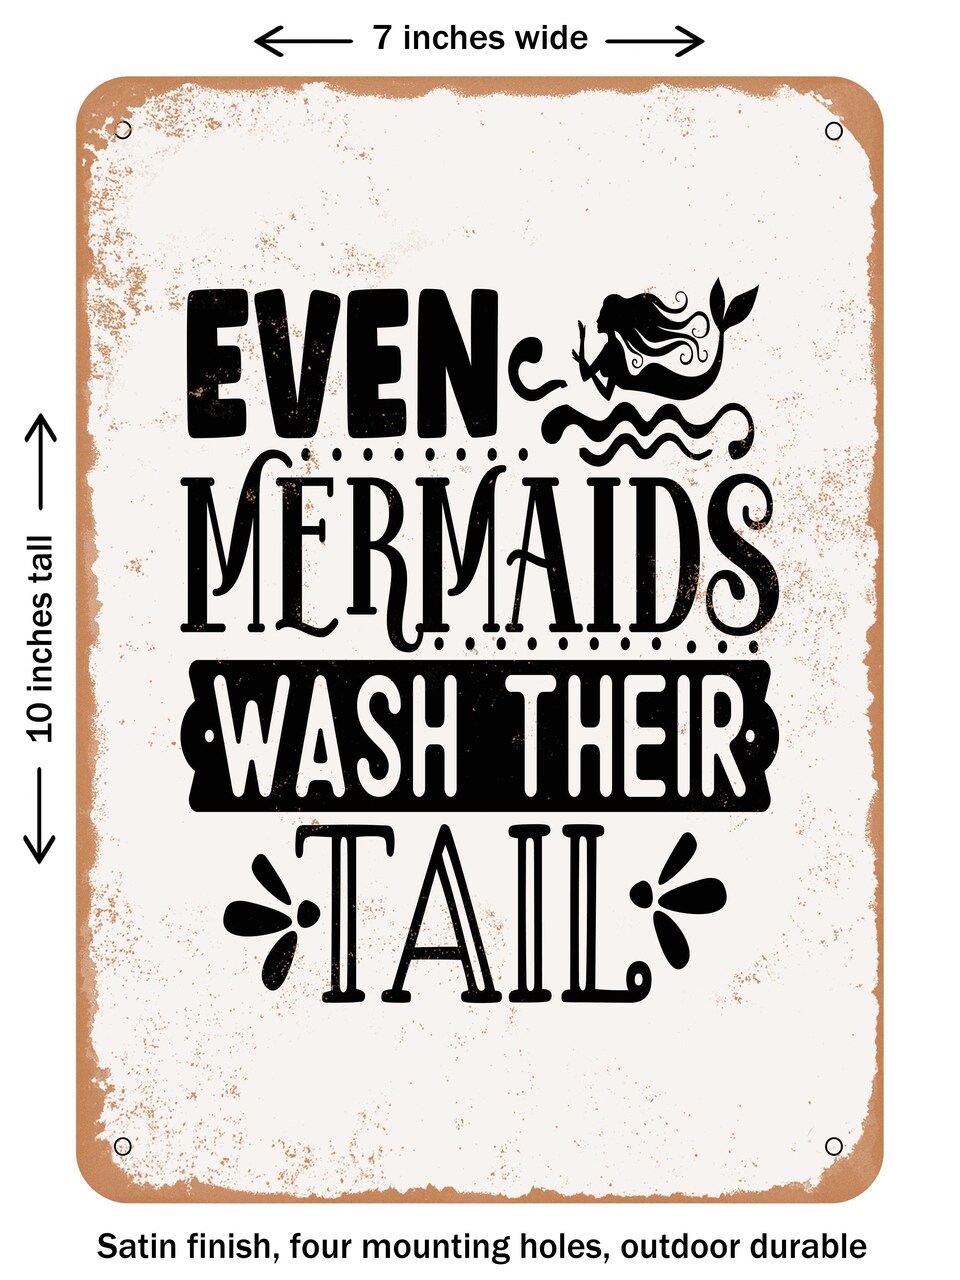 DECORATIVE METAL SIGN - Even Mermaids Wash their Tail  - Vintage Rusty Look